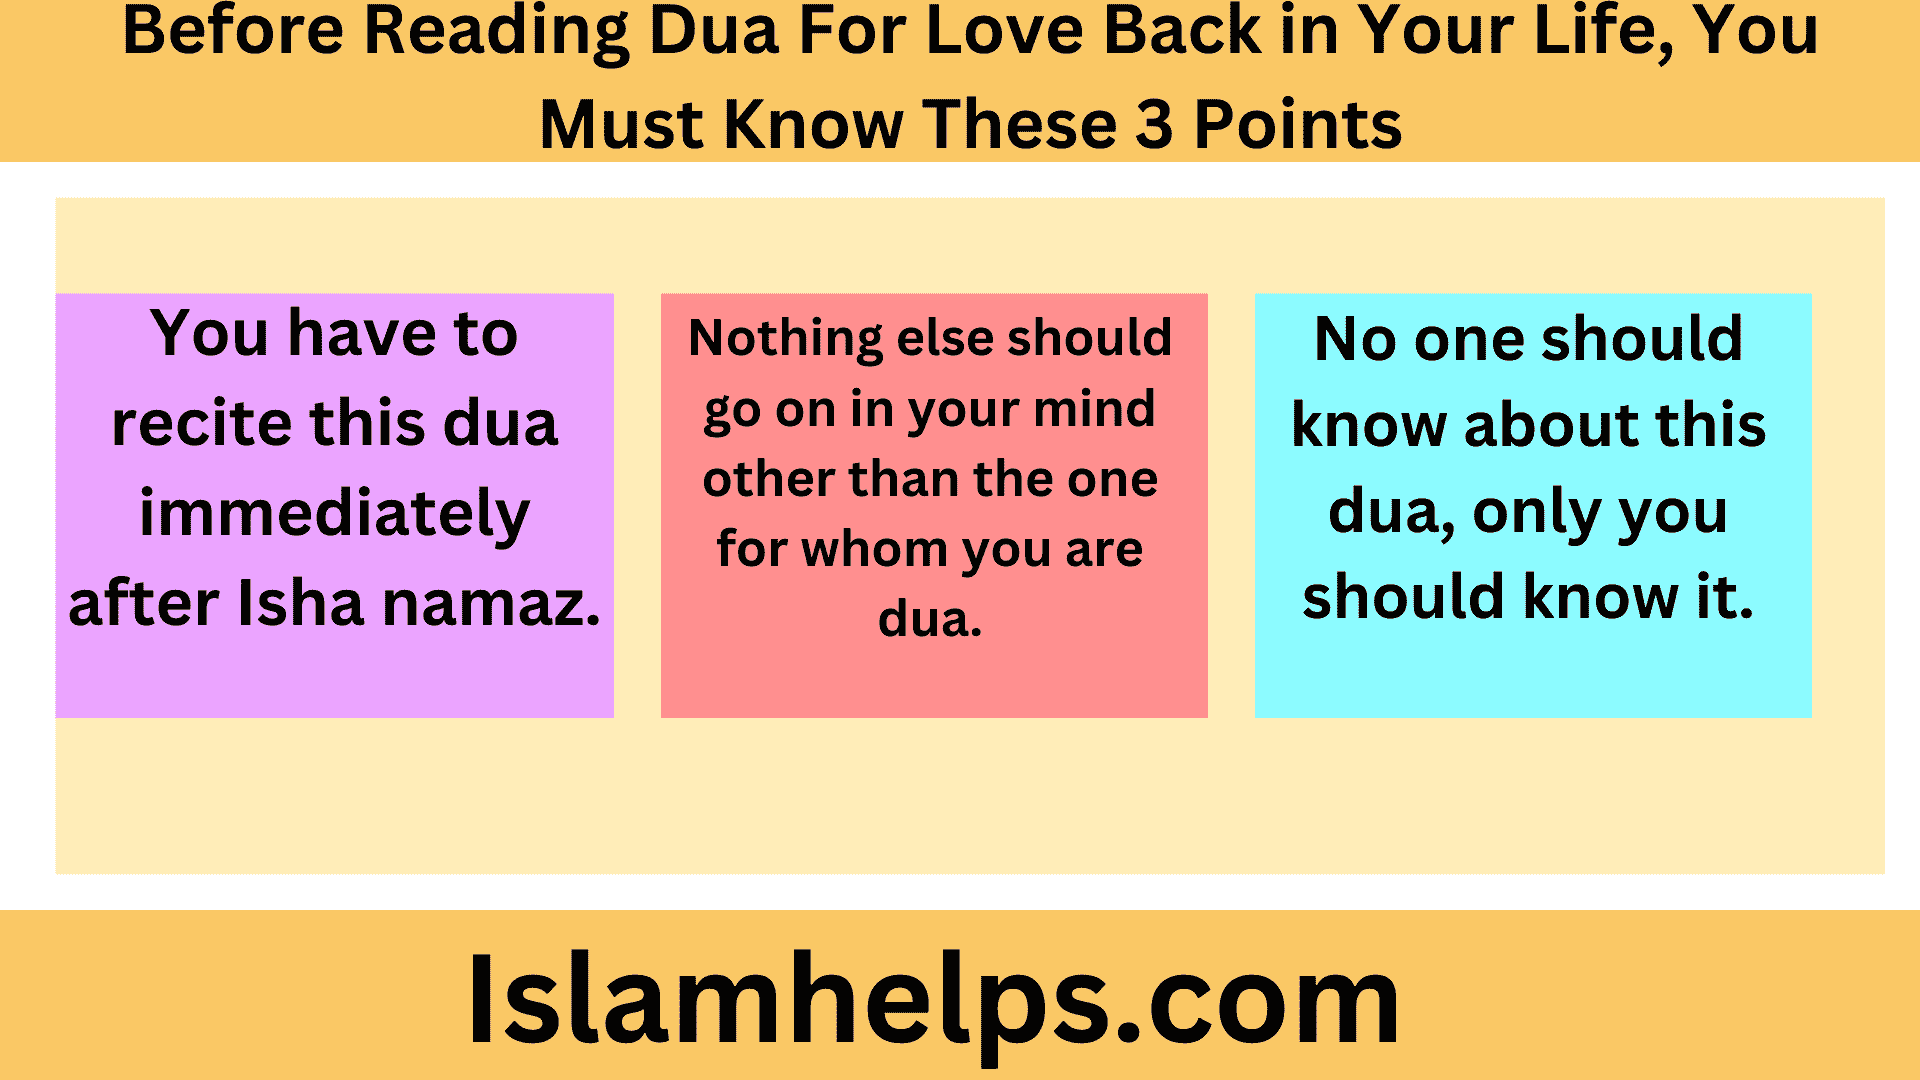 Before Reading Dua For Love Back in Your Life, You Must Know These 3 Points